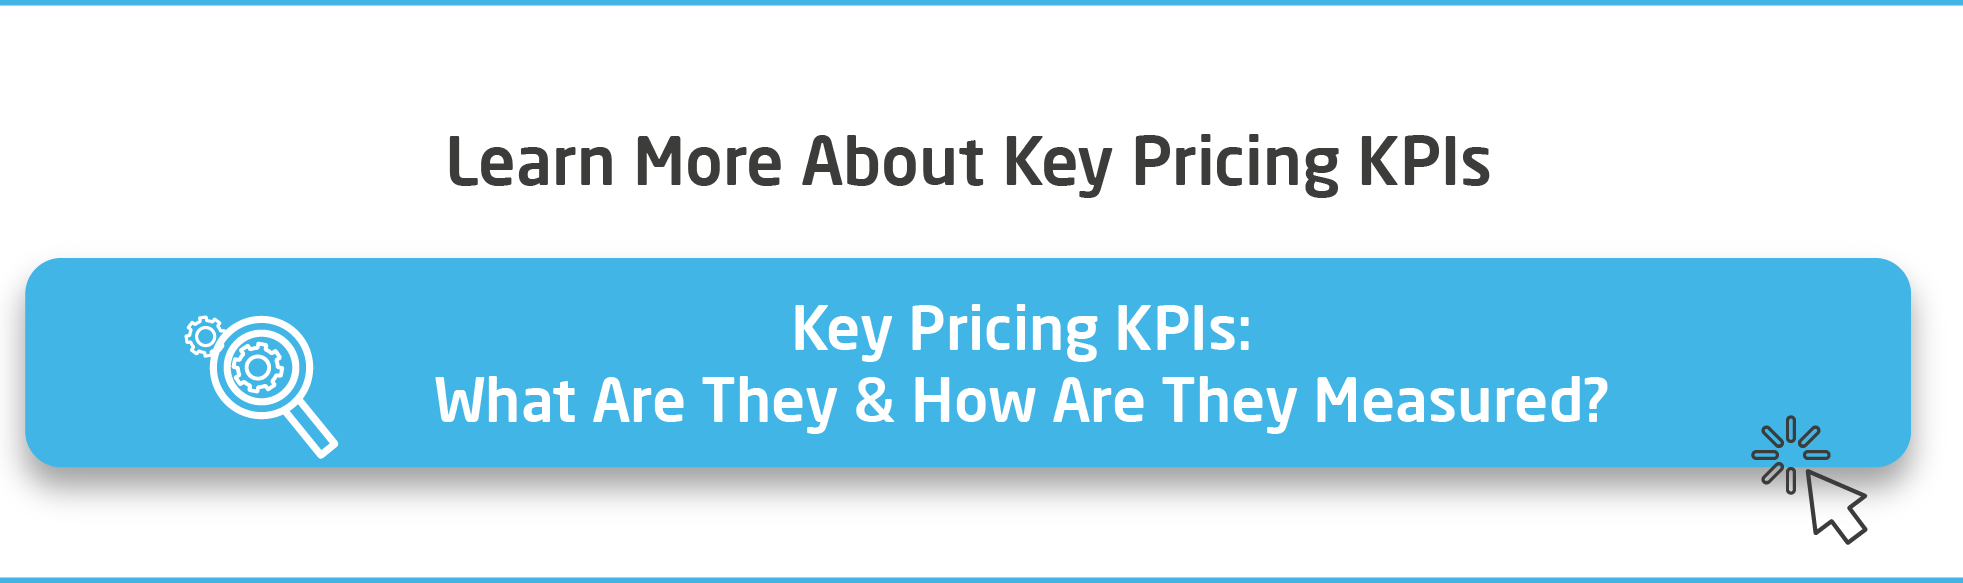 CTA-Learn-More-About-Key-Pricing-KPIs